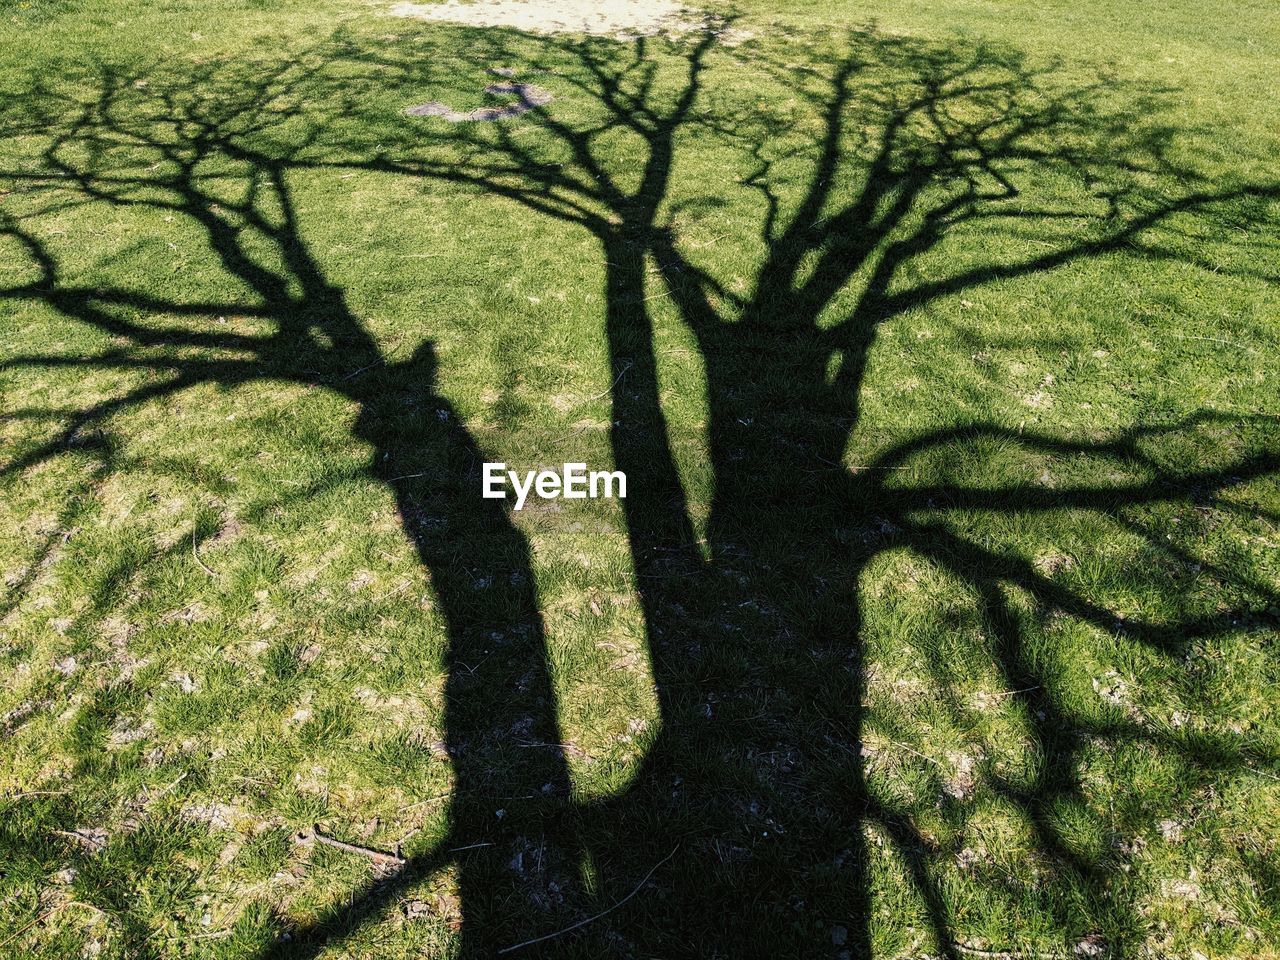 The shadow of a tree on the grass